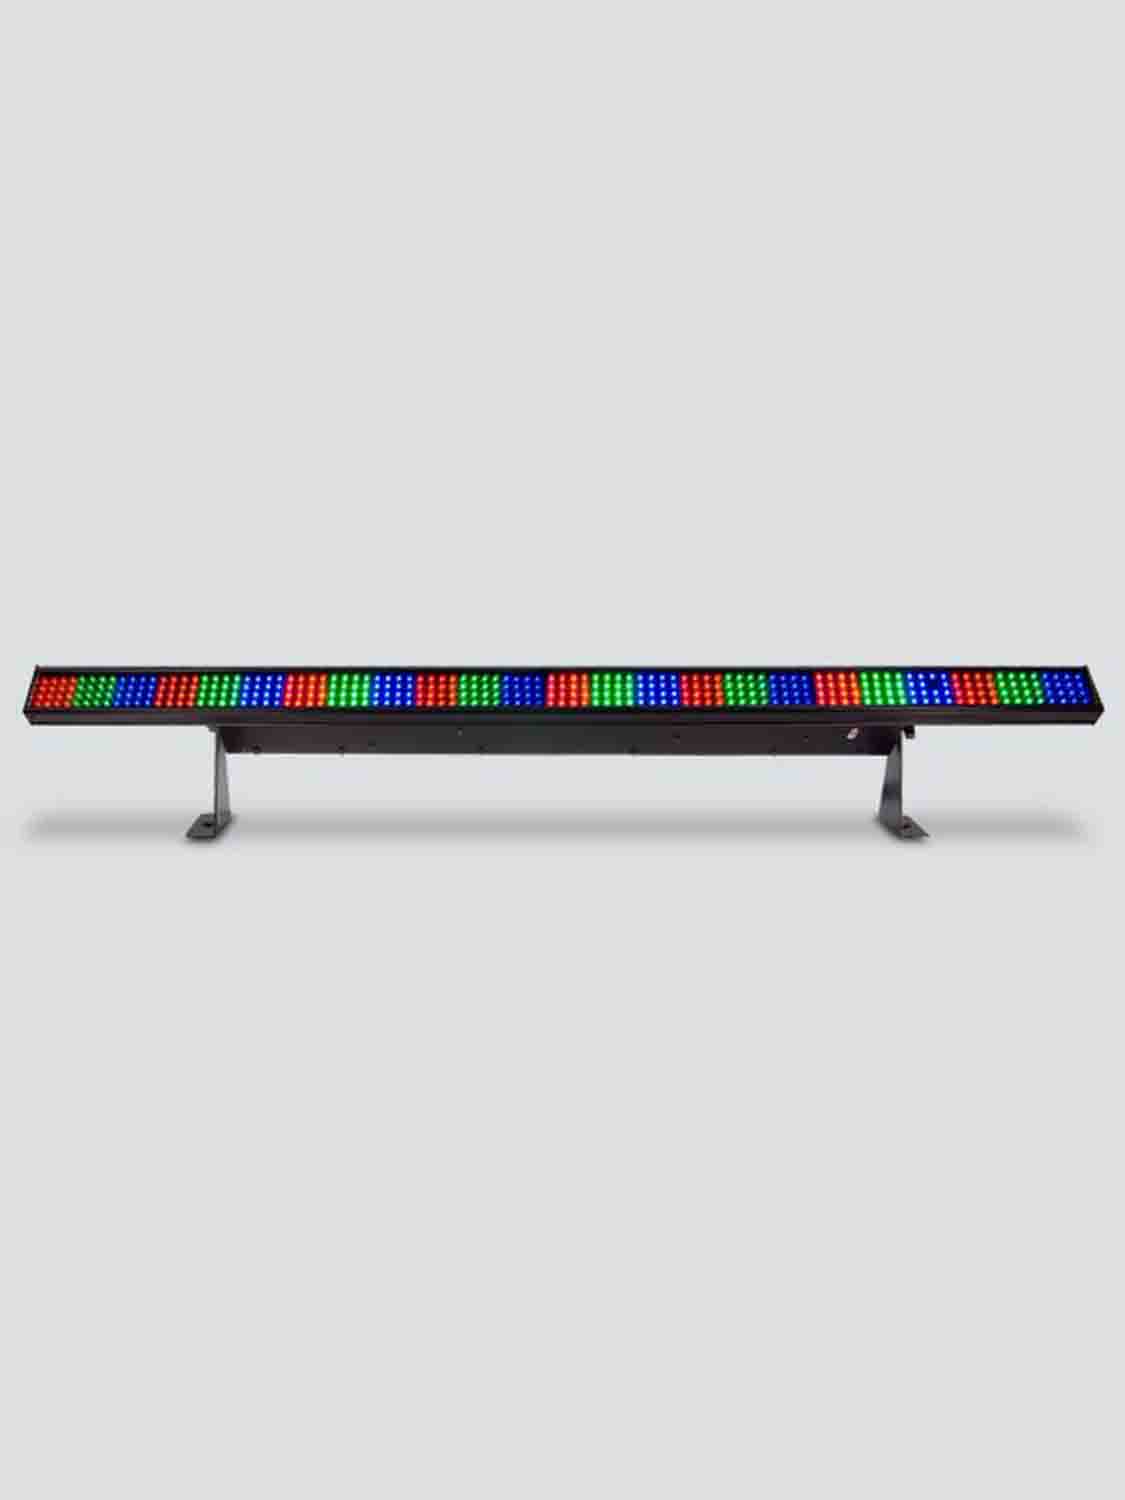 Chauvet DJ COLORstrip LED Linear Wash Light w/Built-In Automated and Sound Active Programs - Hollywood DJ